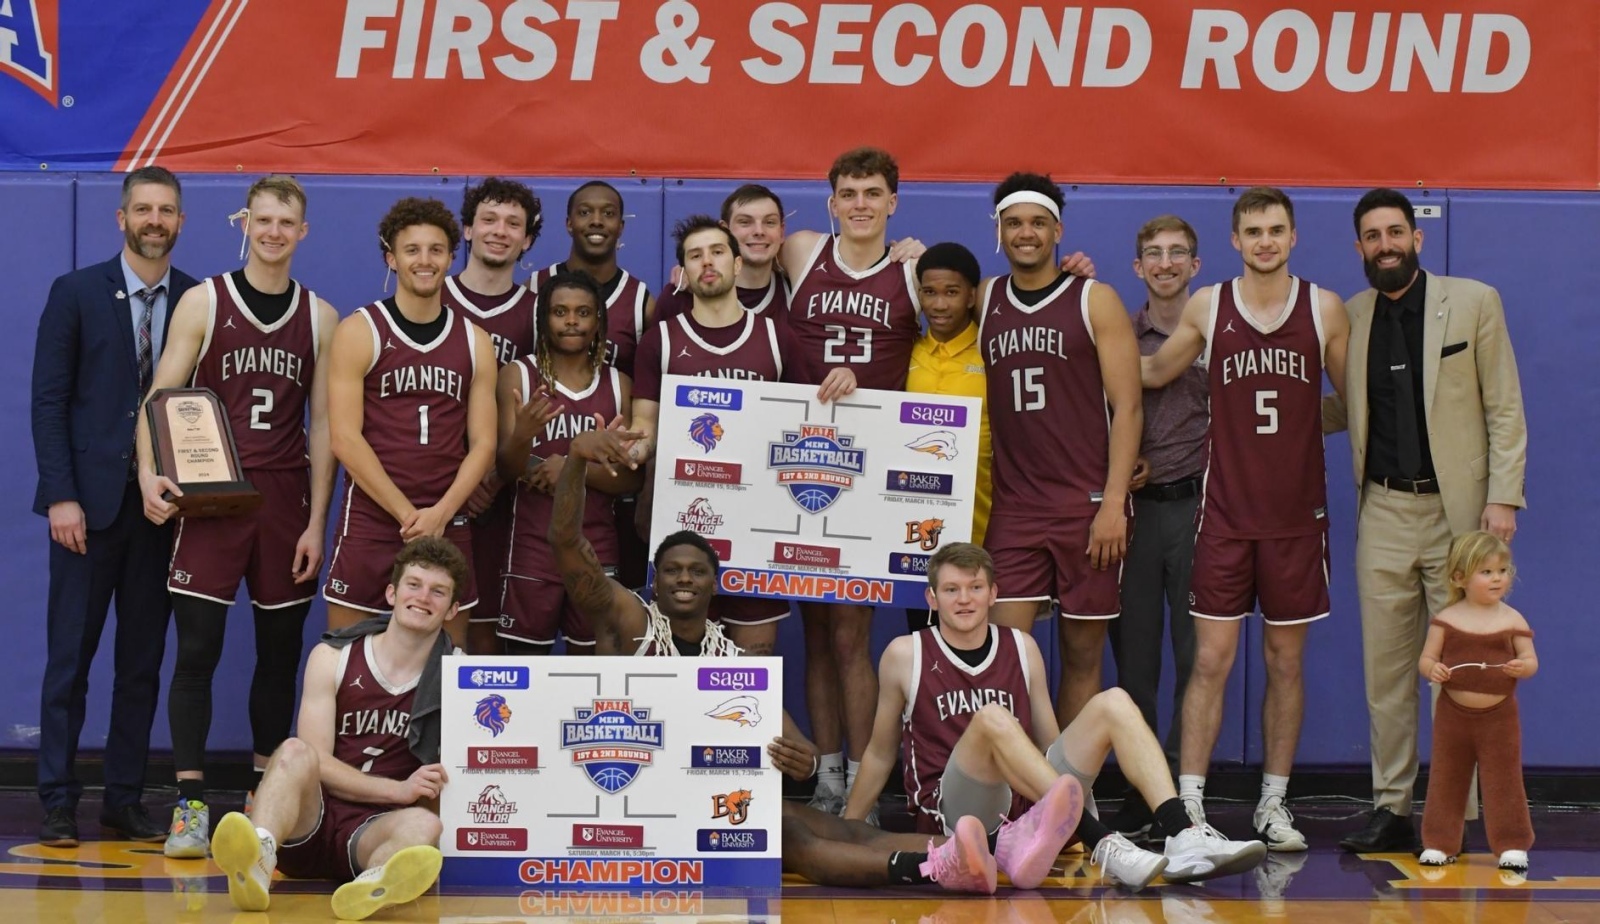 The Evangel Valor men's basketball team poses for a photo after clinching a spot in the Round of 16 at the NAIA National Tournament.